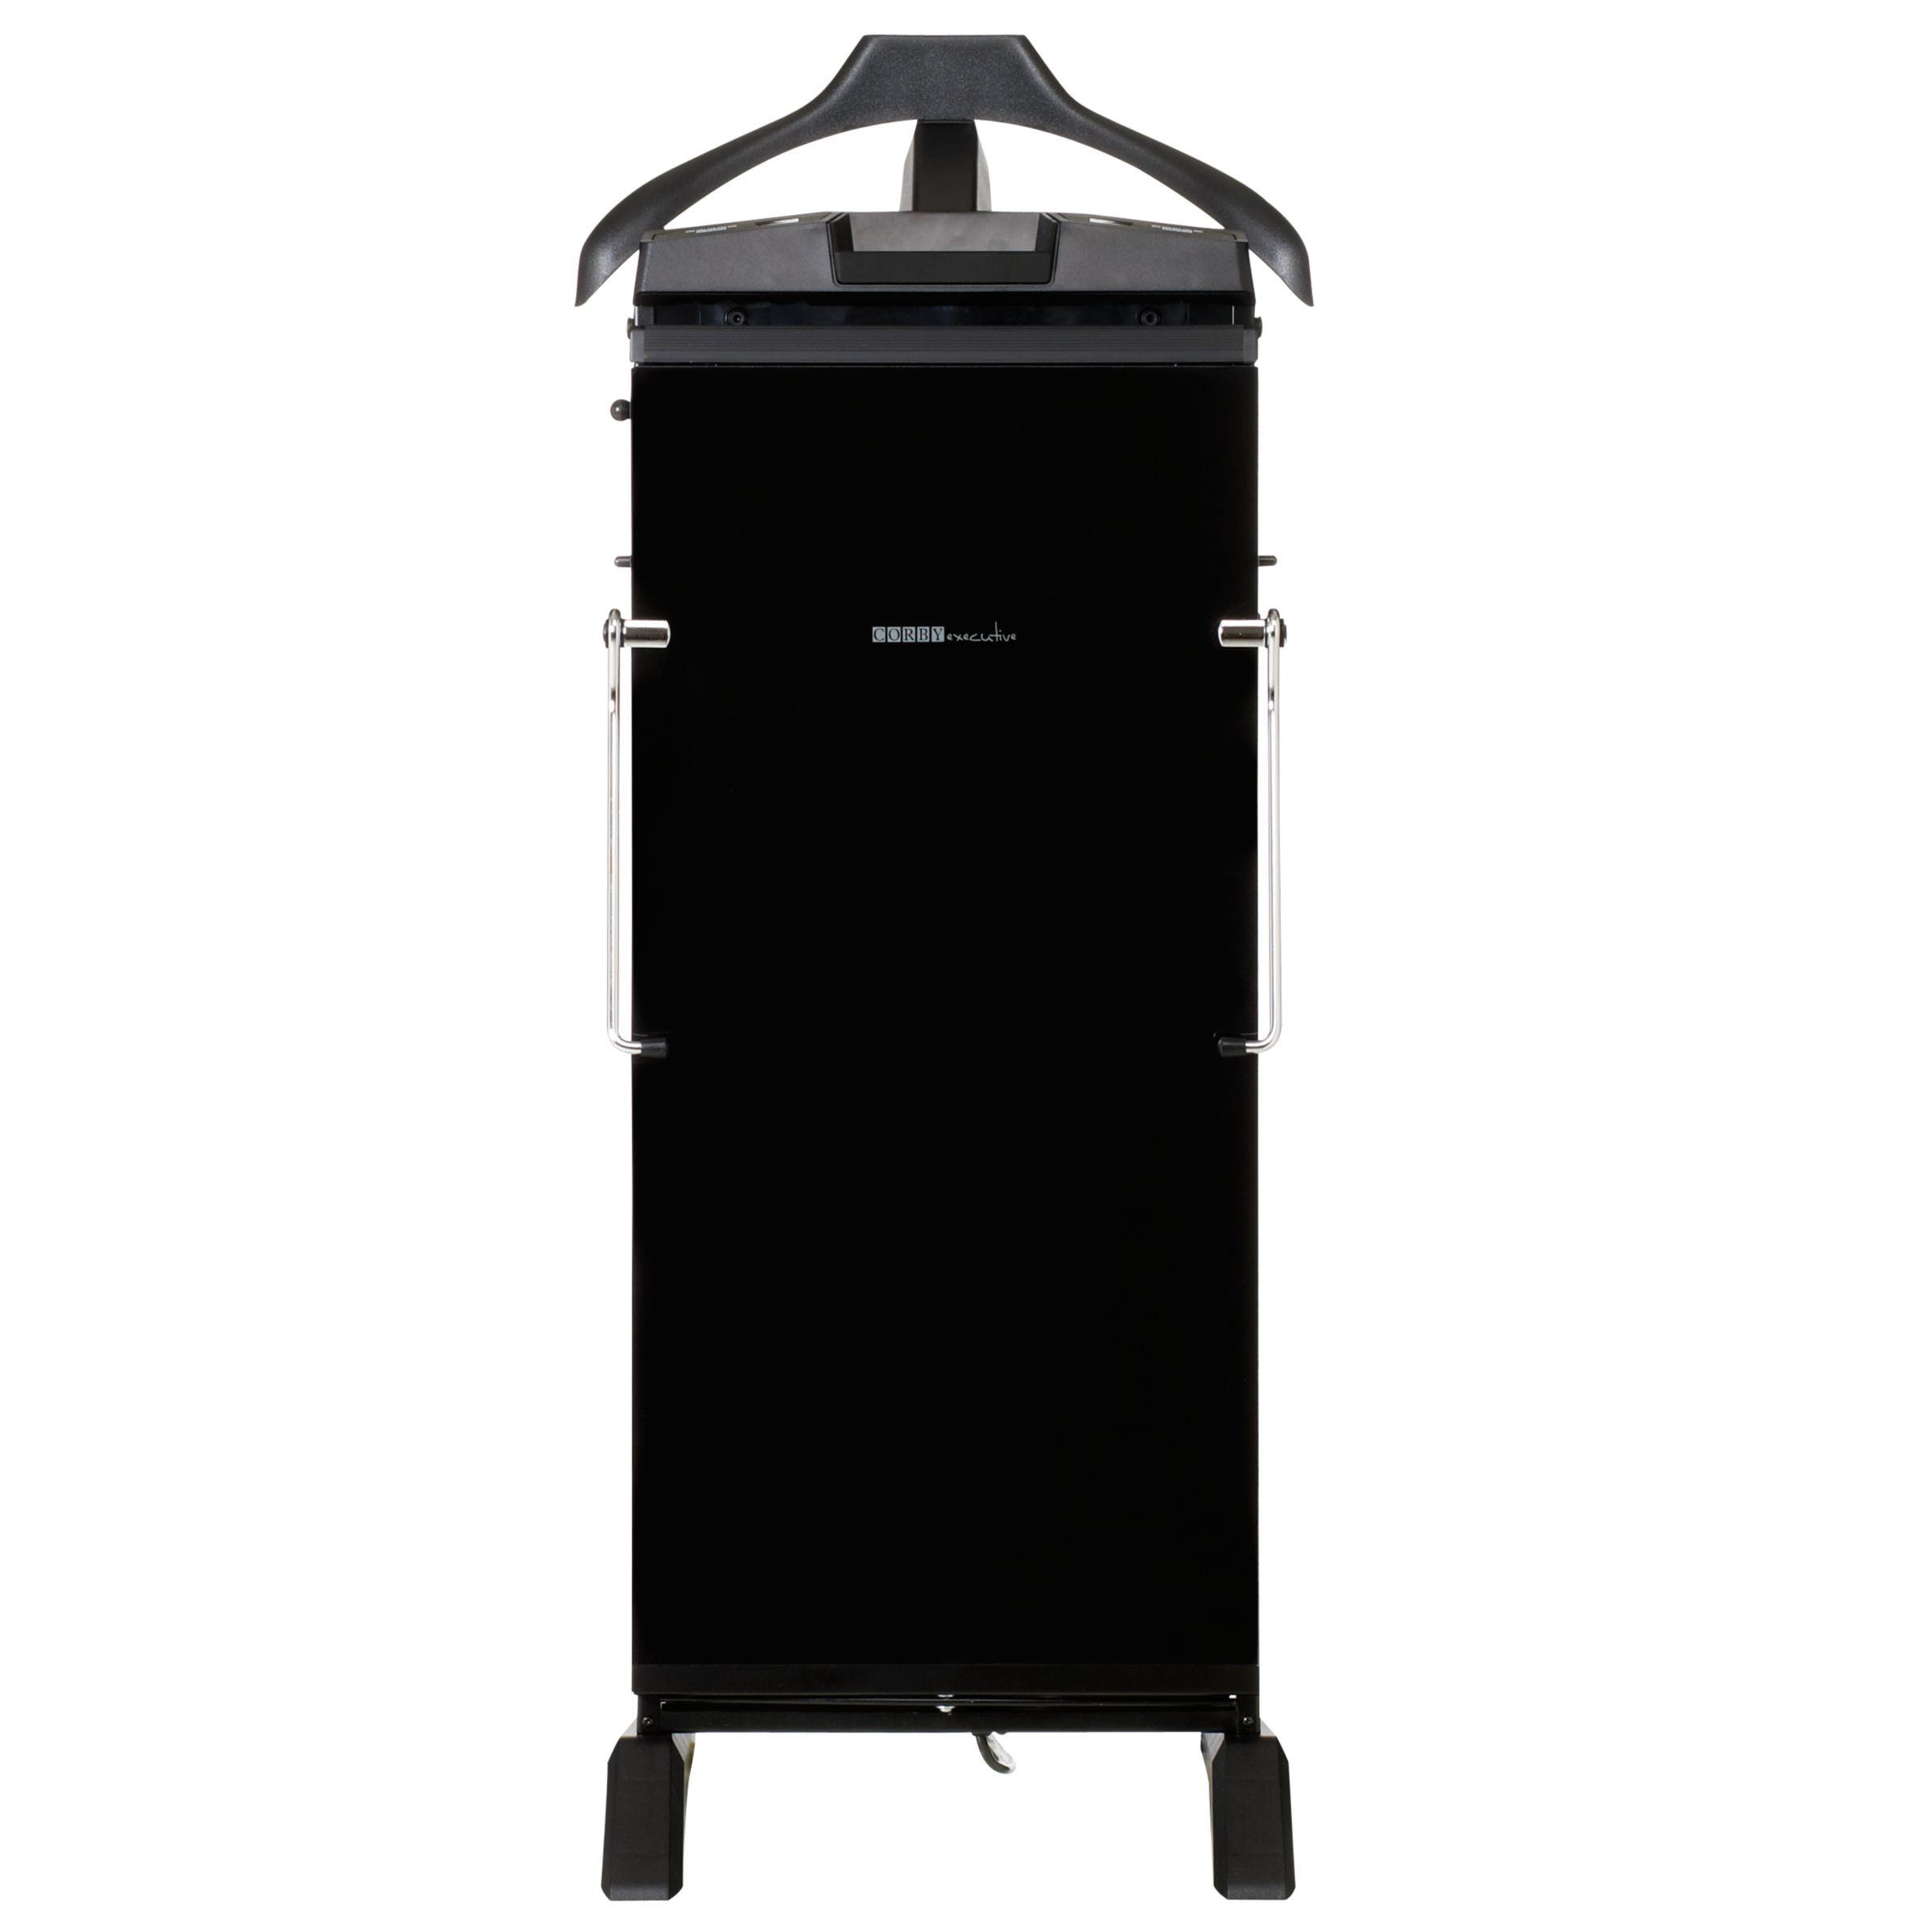 Corby Executive Trouser Press, Black at JohnLewis